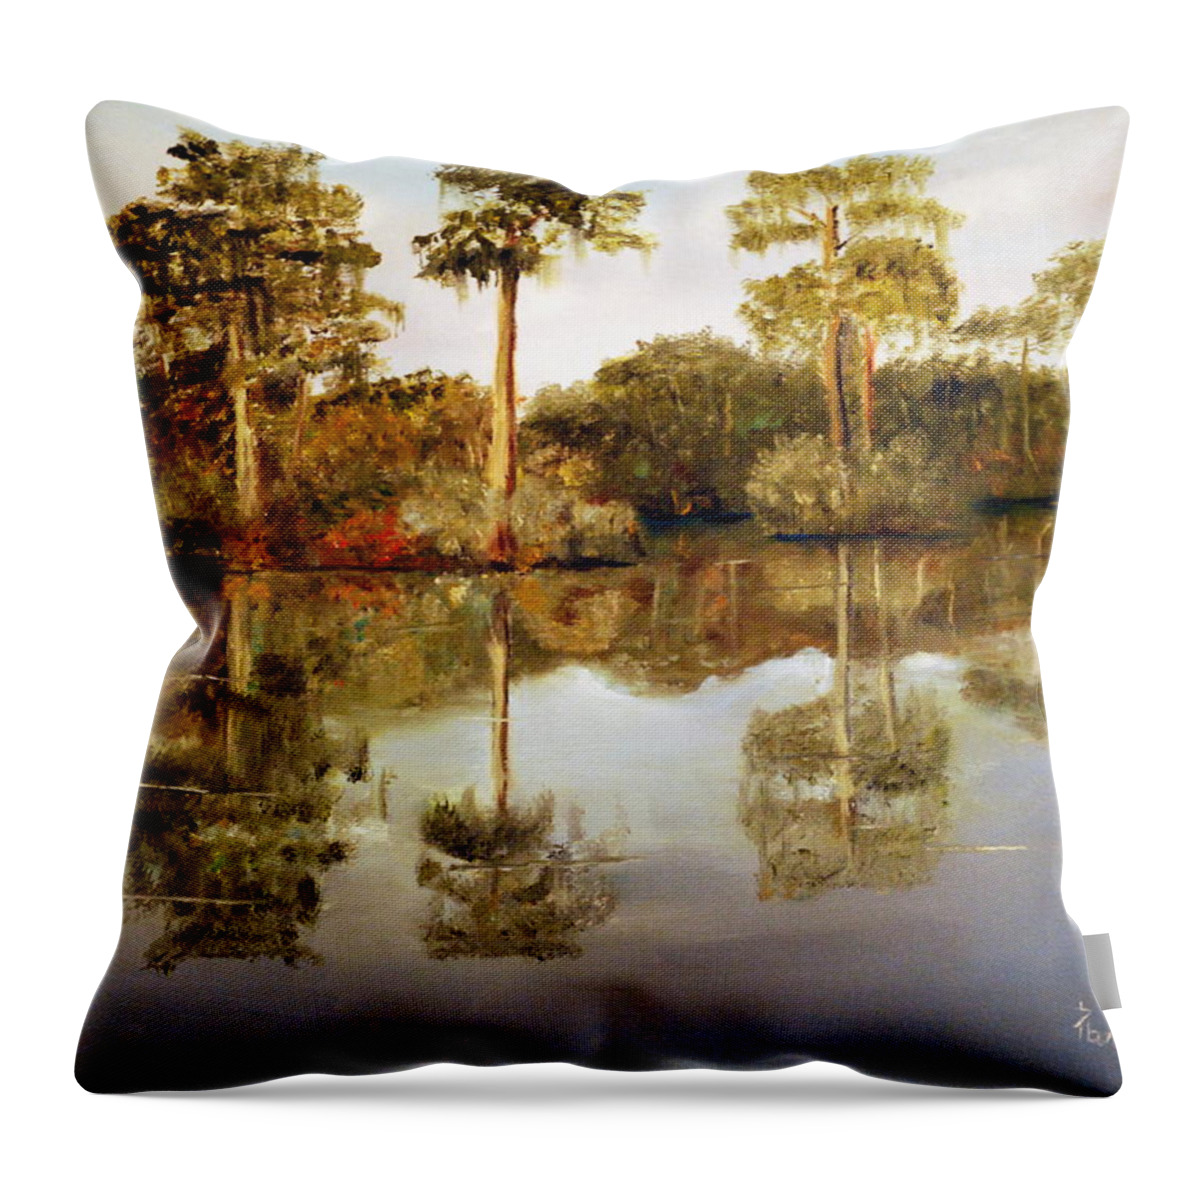 Waccamaw Throw Pillow featuring the painting Waccamaw River by Phil Burton